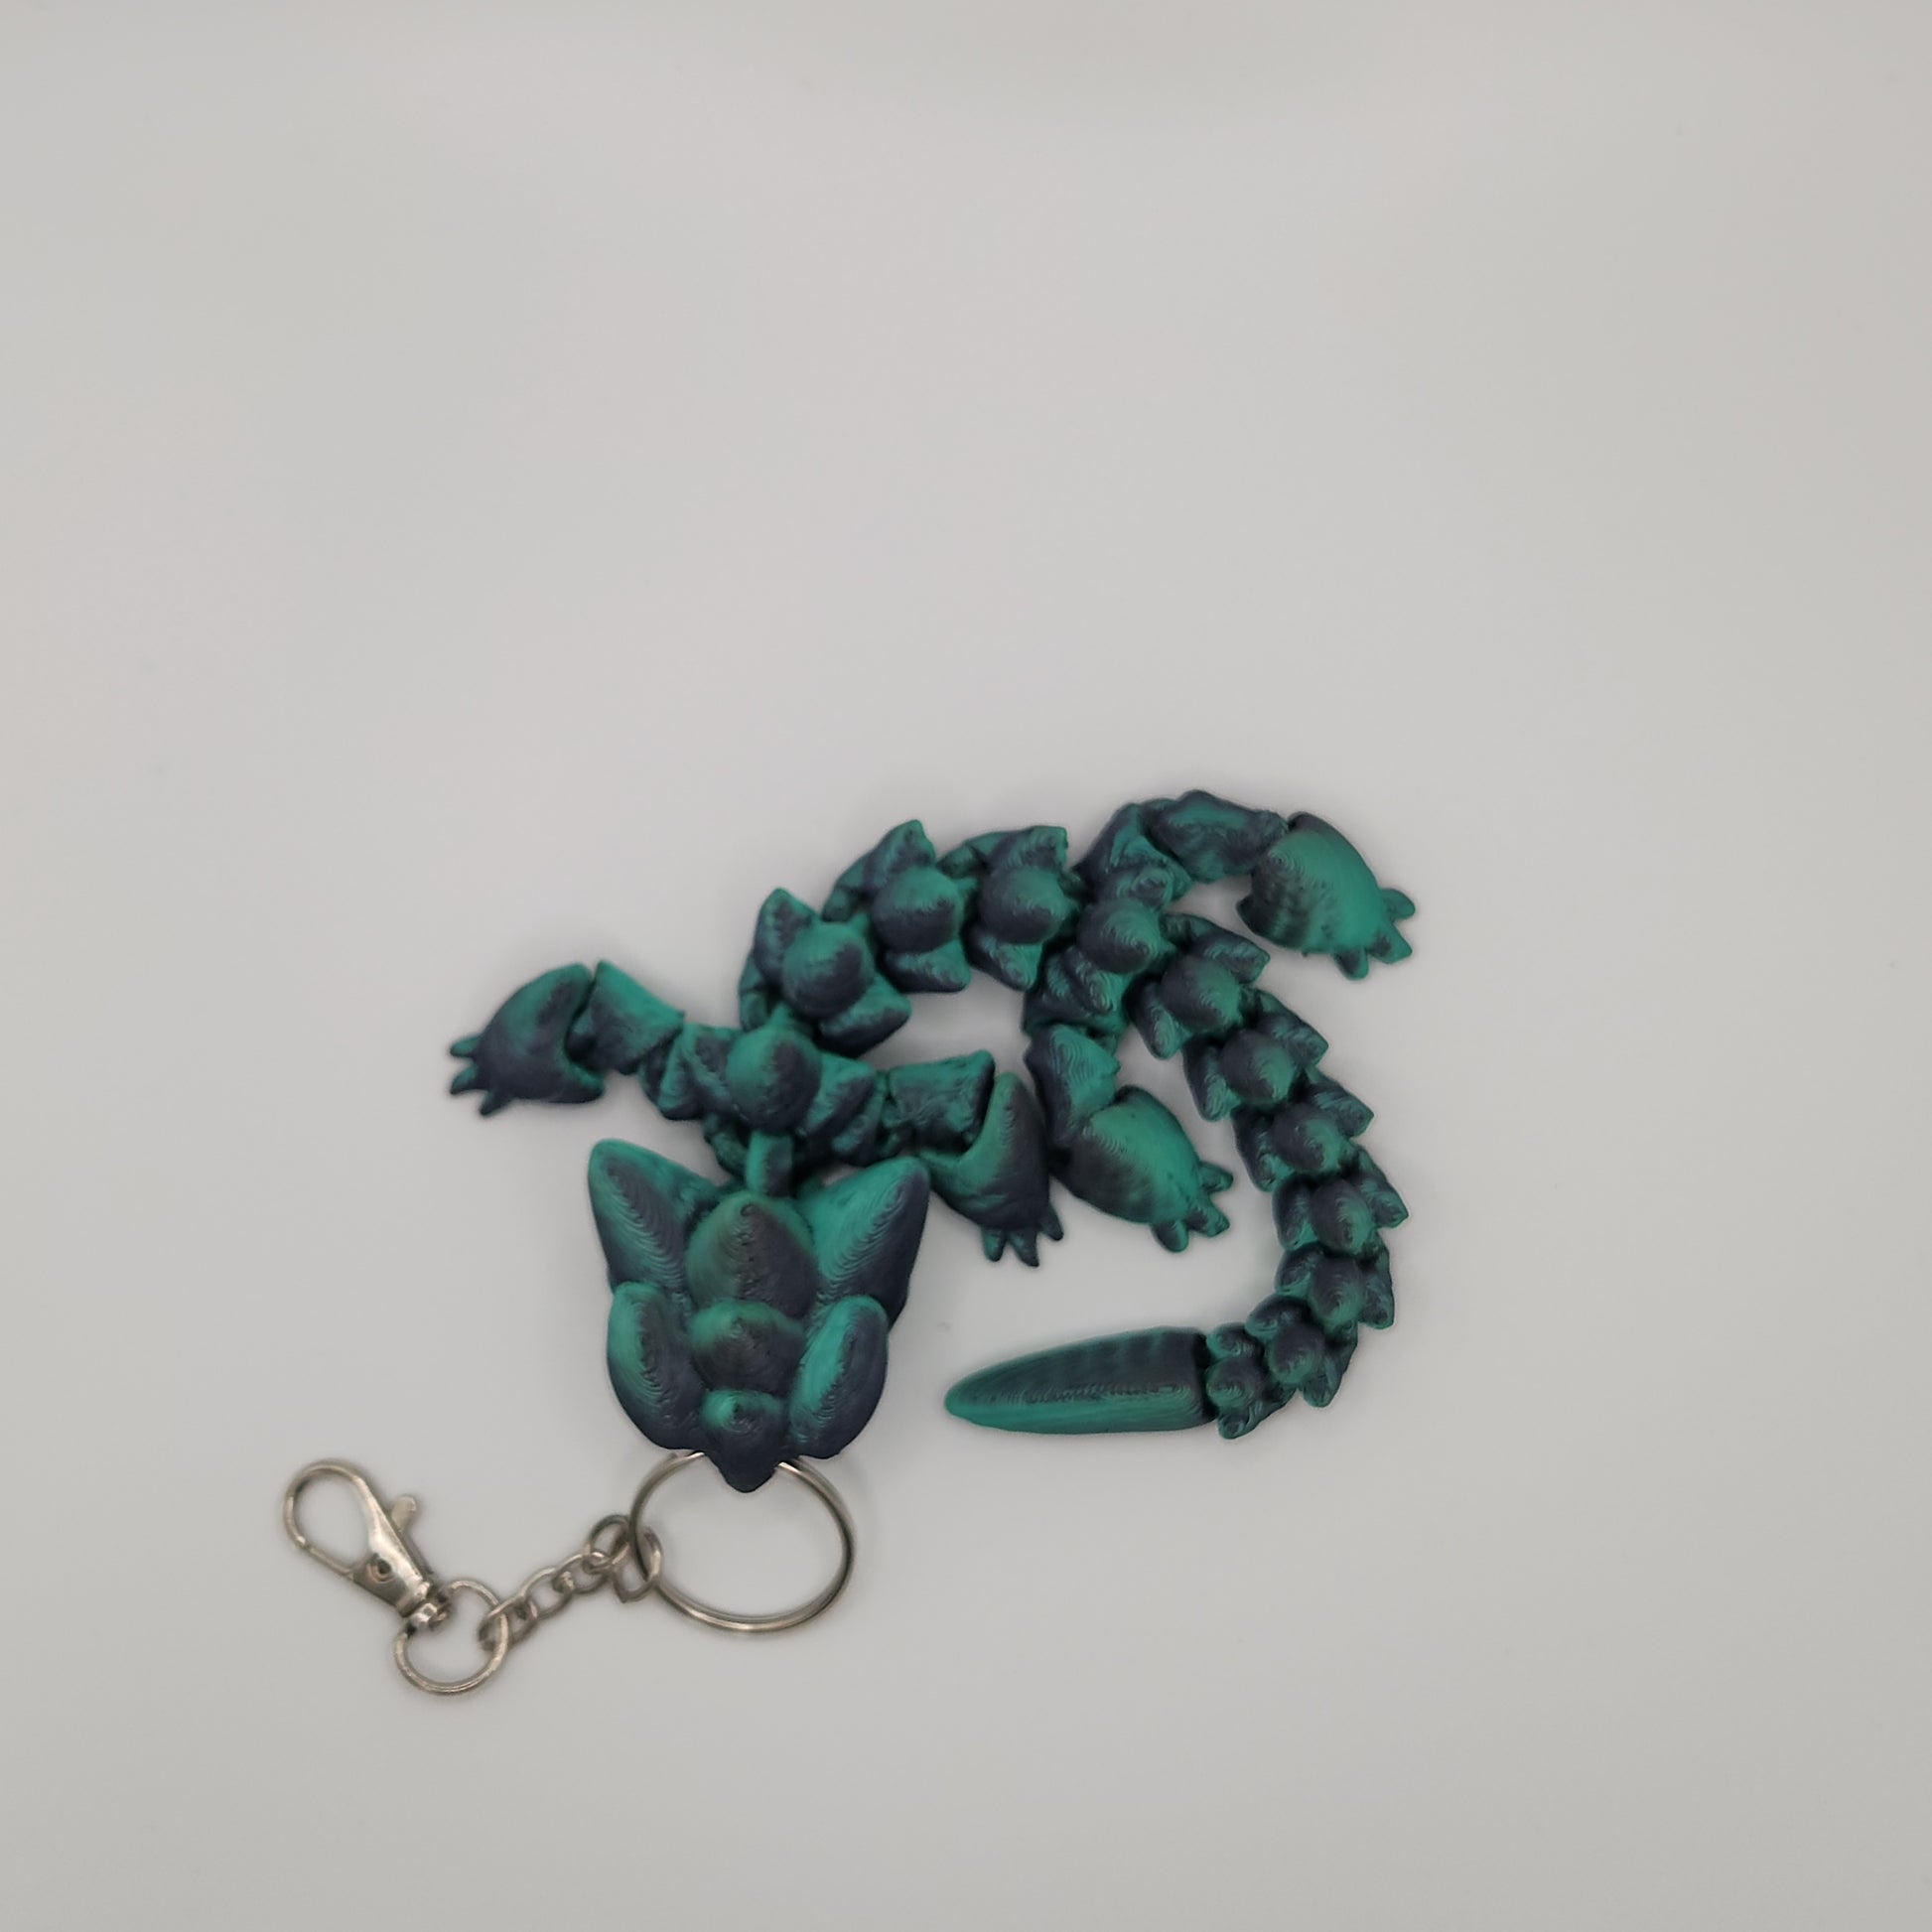 Top-down view of the black and teal articulated dragon keychain, showing its segmented body and attached metal keychain.